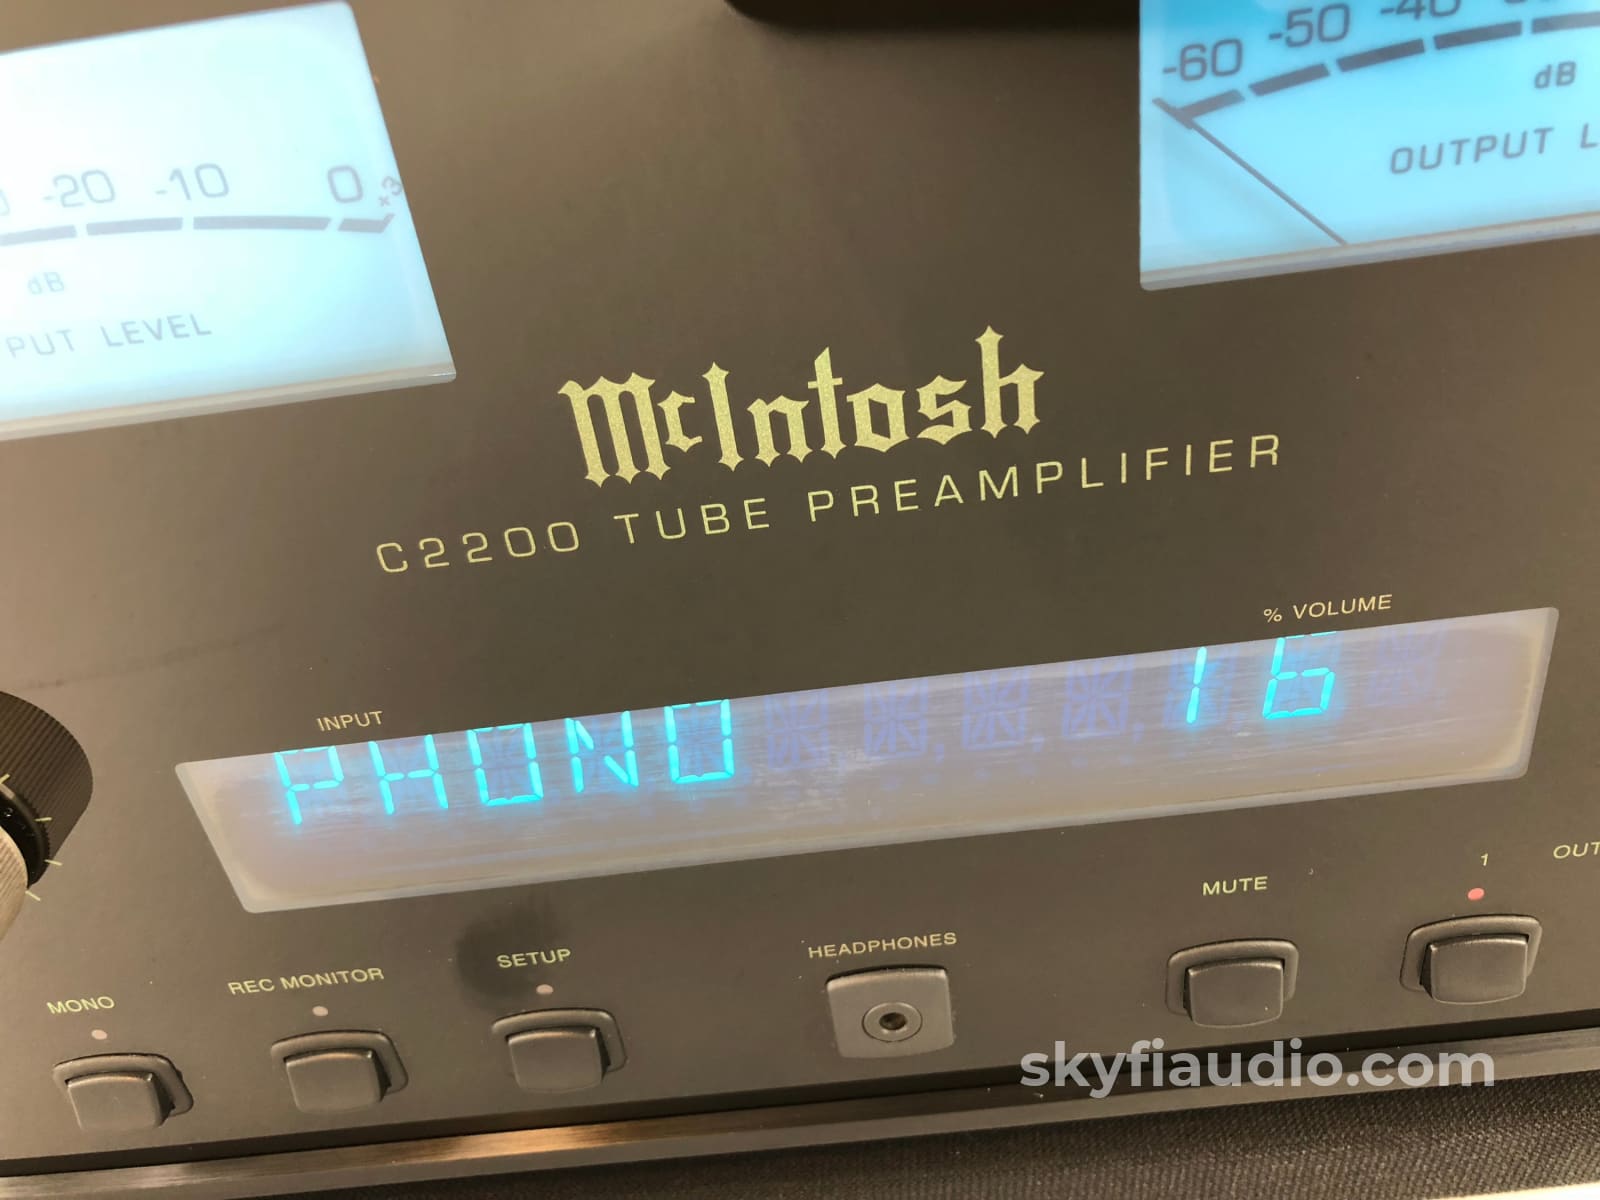 Mcintosh C-2200 Tube Preamp - All Analog For Purists Preamplifier